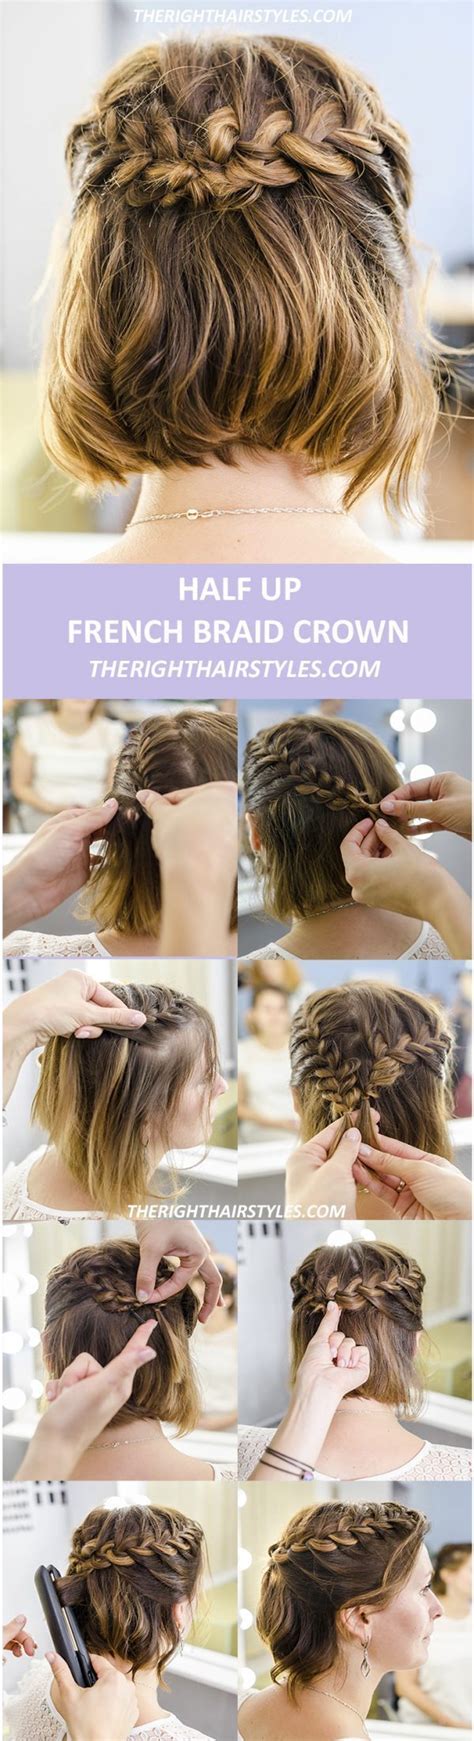 It's a simple french braid that takes the form of a cute little crown. How to Do a Half-Up French Braid Crown in 6 Easy Steps